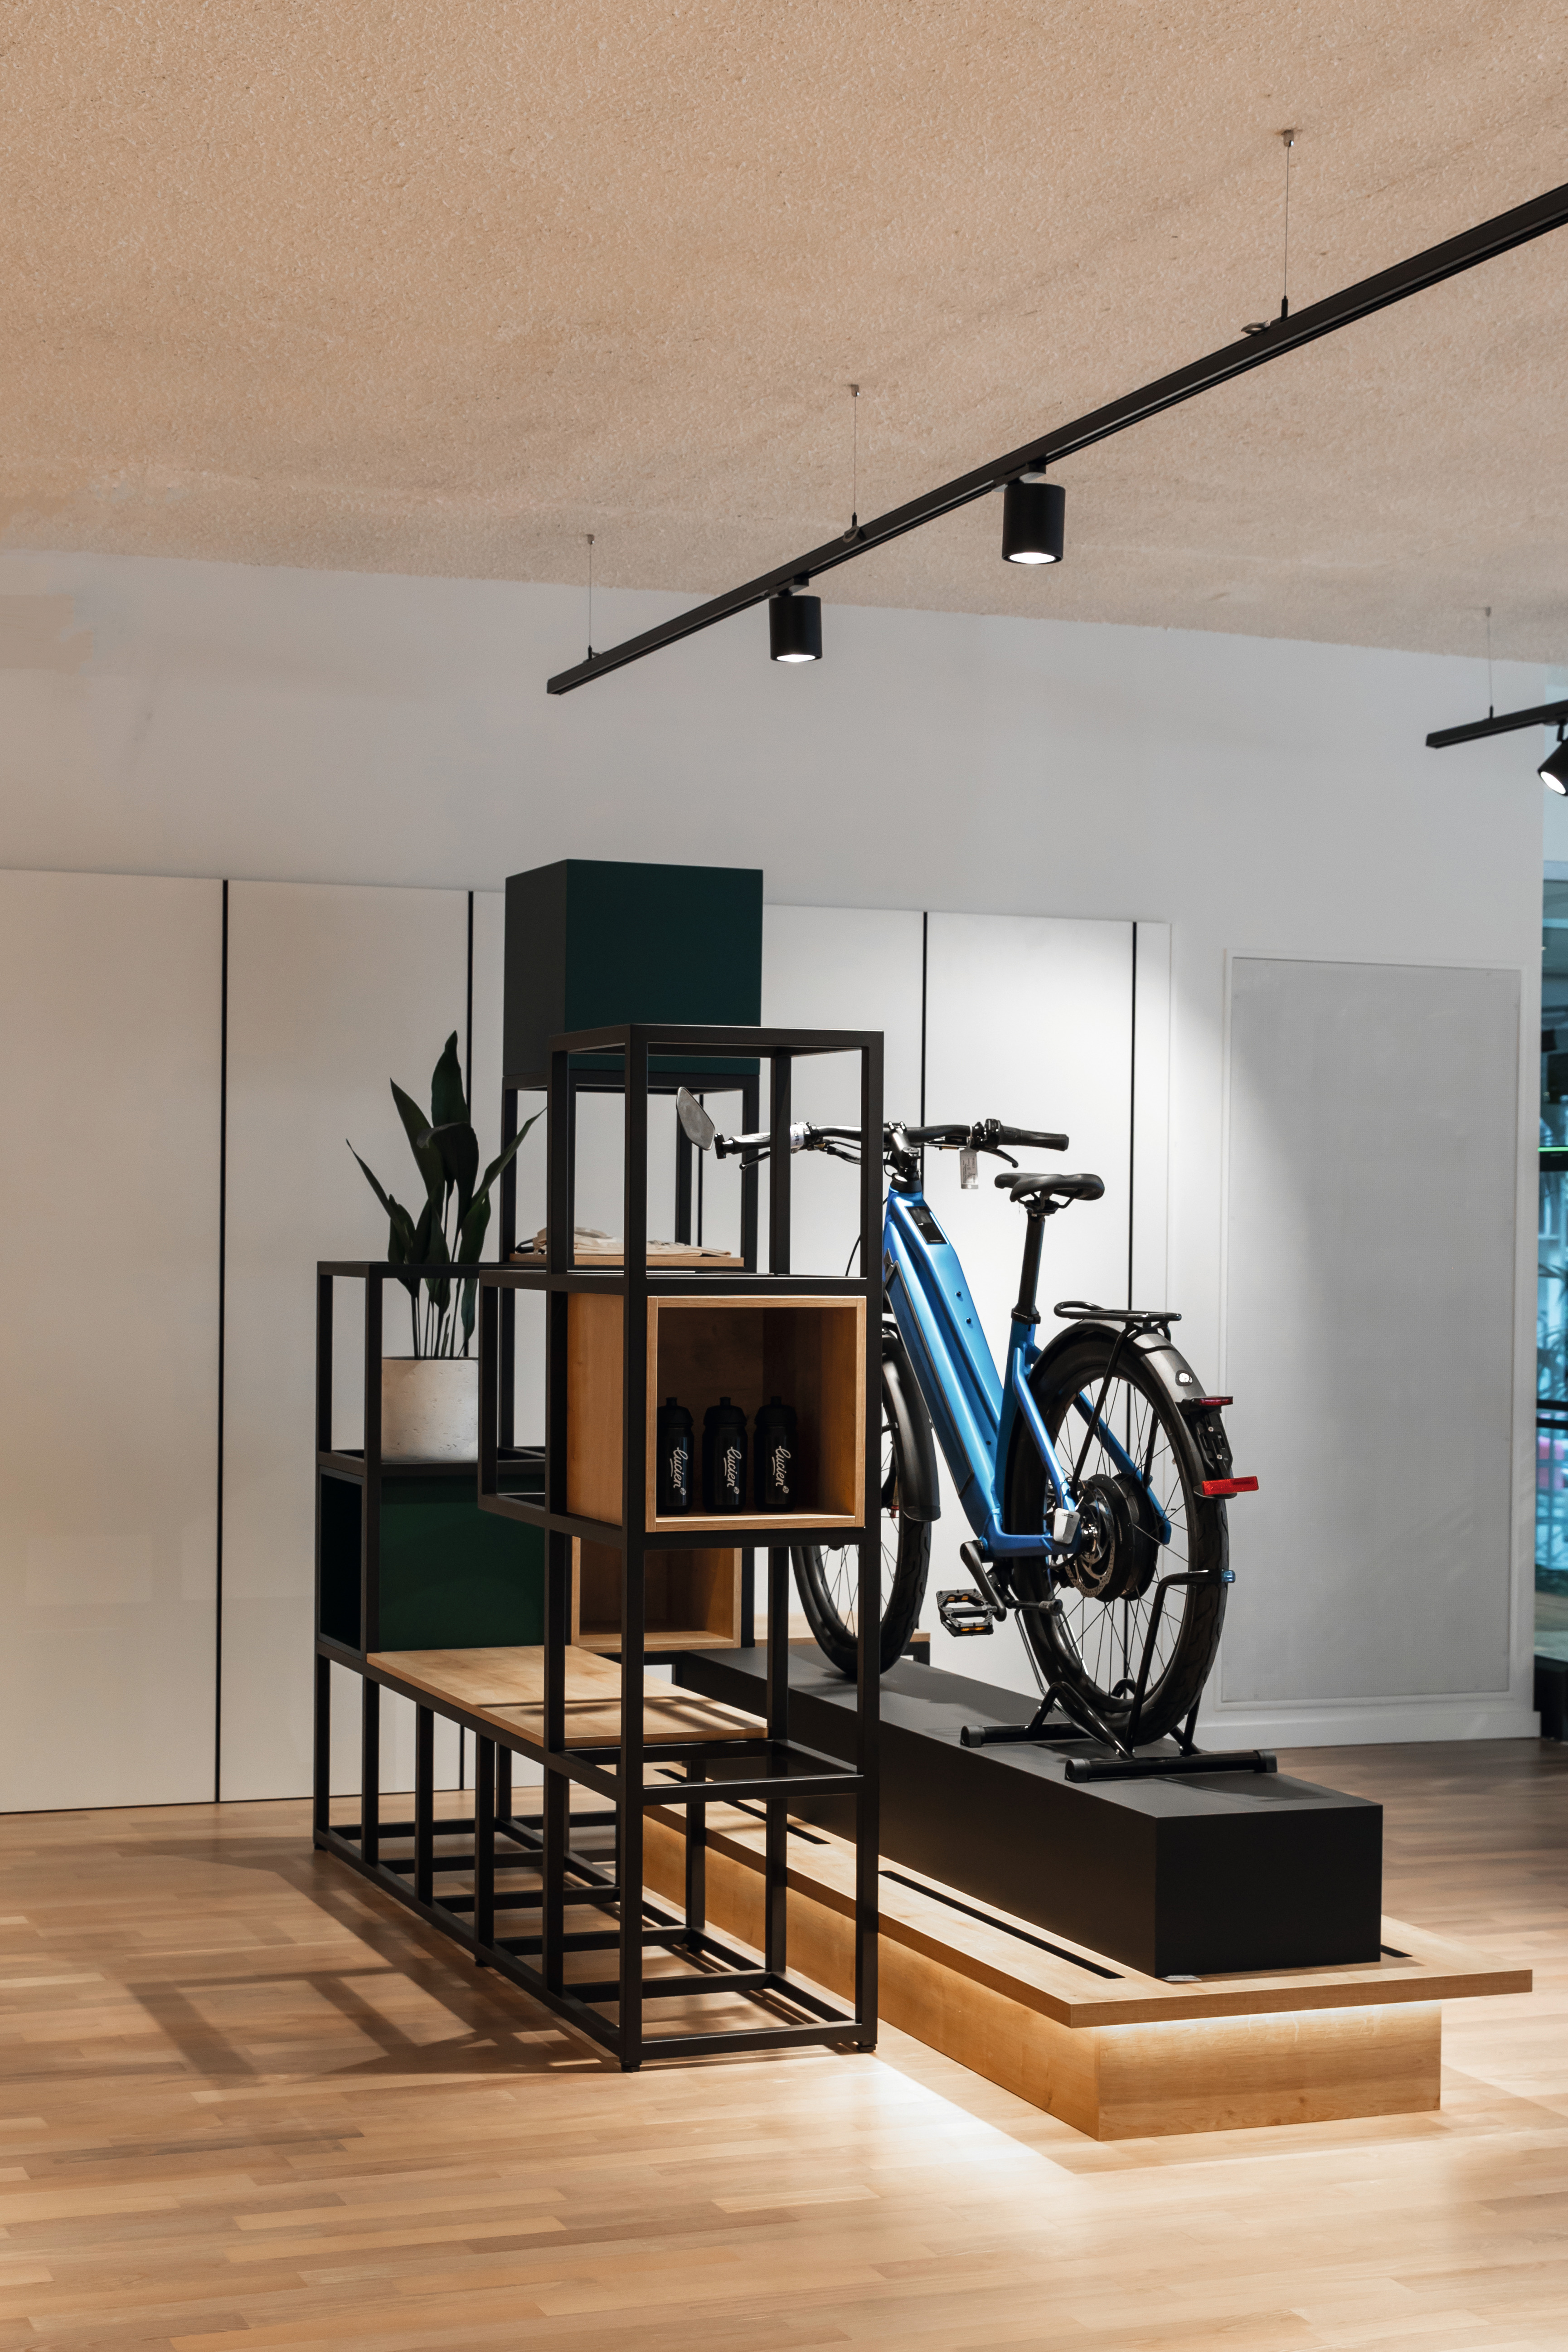 Bicycles are displayed on pedestals made of U999 PT Black.